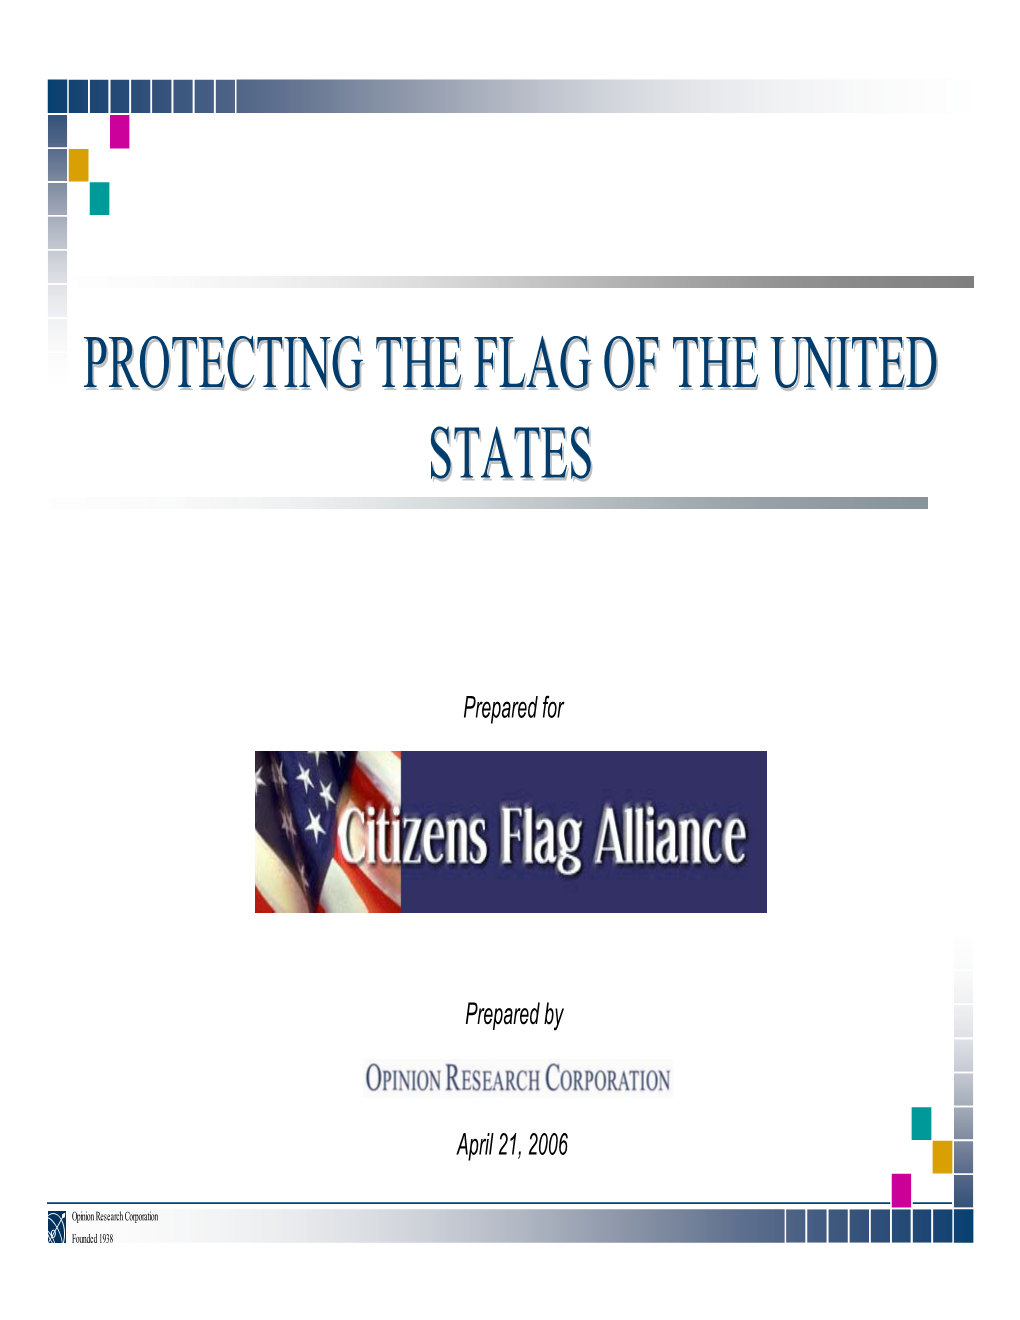 Protecting the Flag of the United States 2 KEYKEY FINDINGSFINDINGS